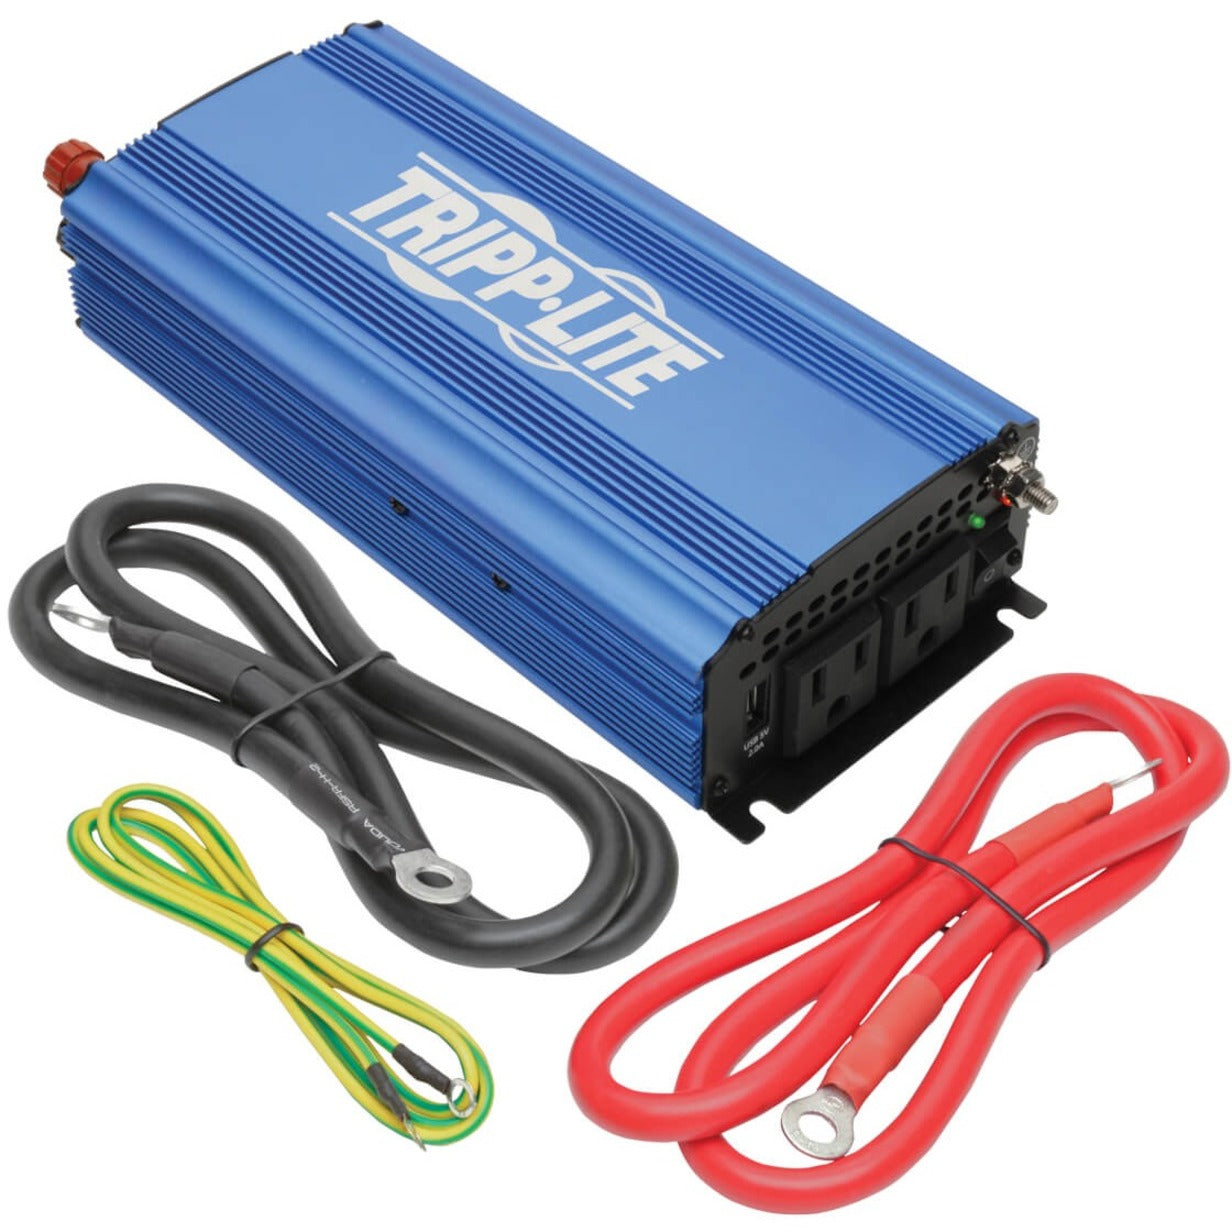 Tripp Lite PINV750 Power Inverter, 750W Light-Duty Compact with 2 AC/1 USB - 2.0A/Battery Cables